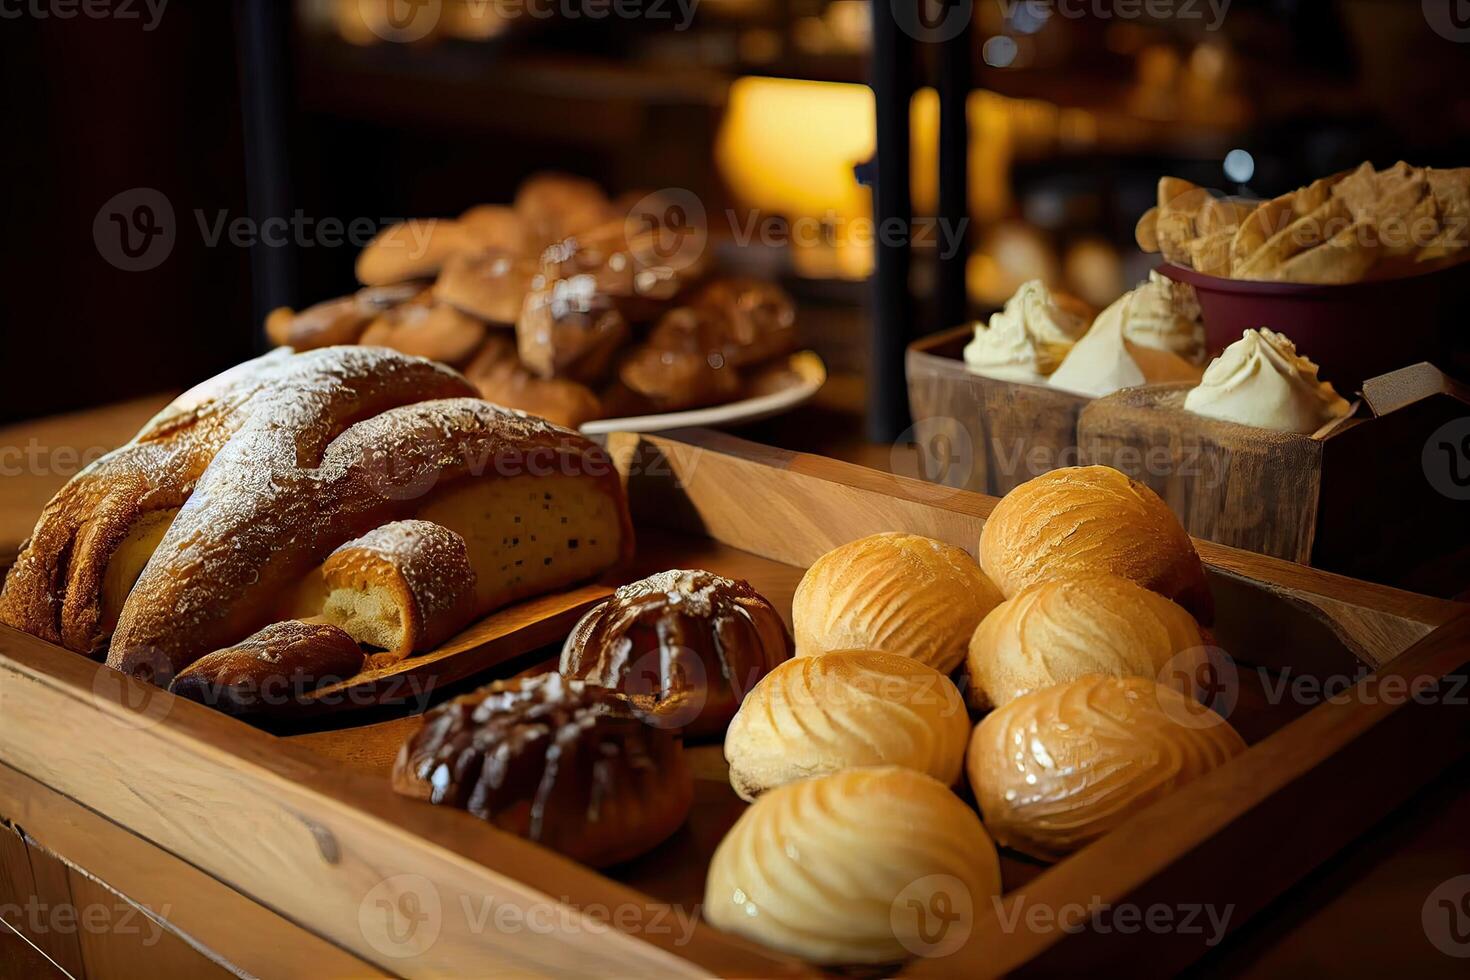 bakery interior with display counters full of scrumptious bread and pastries. Shop a patisserie or bakery with croissants, apple pies, waffles, and churros. Freshly baked pastries. photo